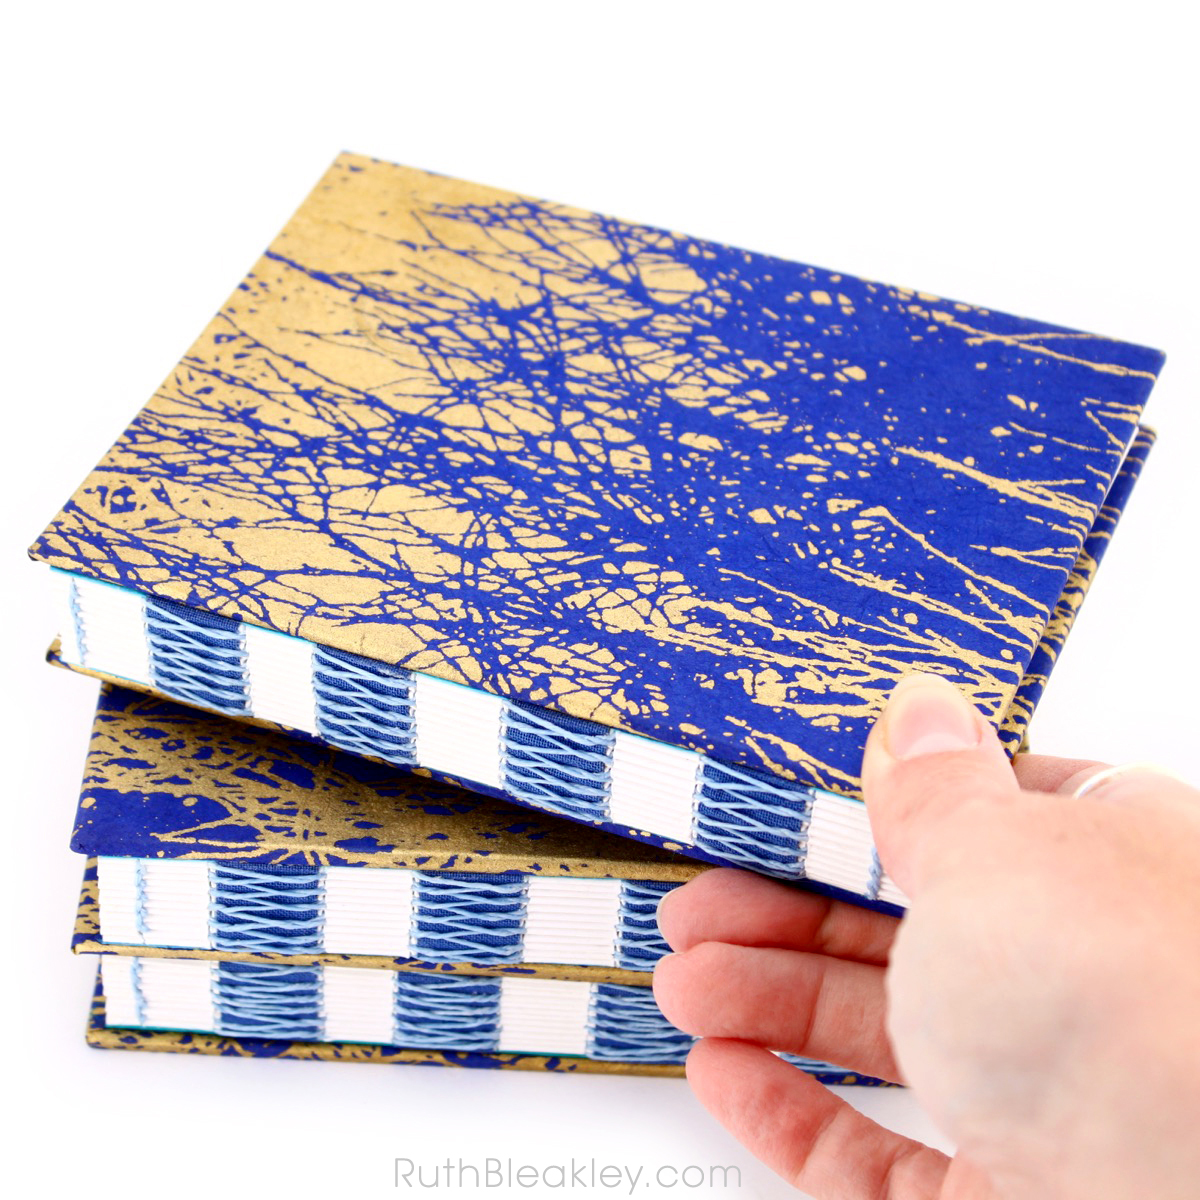 Blue and Gold French Link Journal handmade by Ruth Bleakley - 13